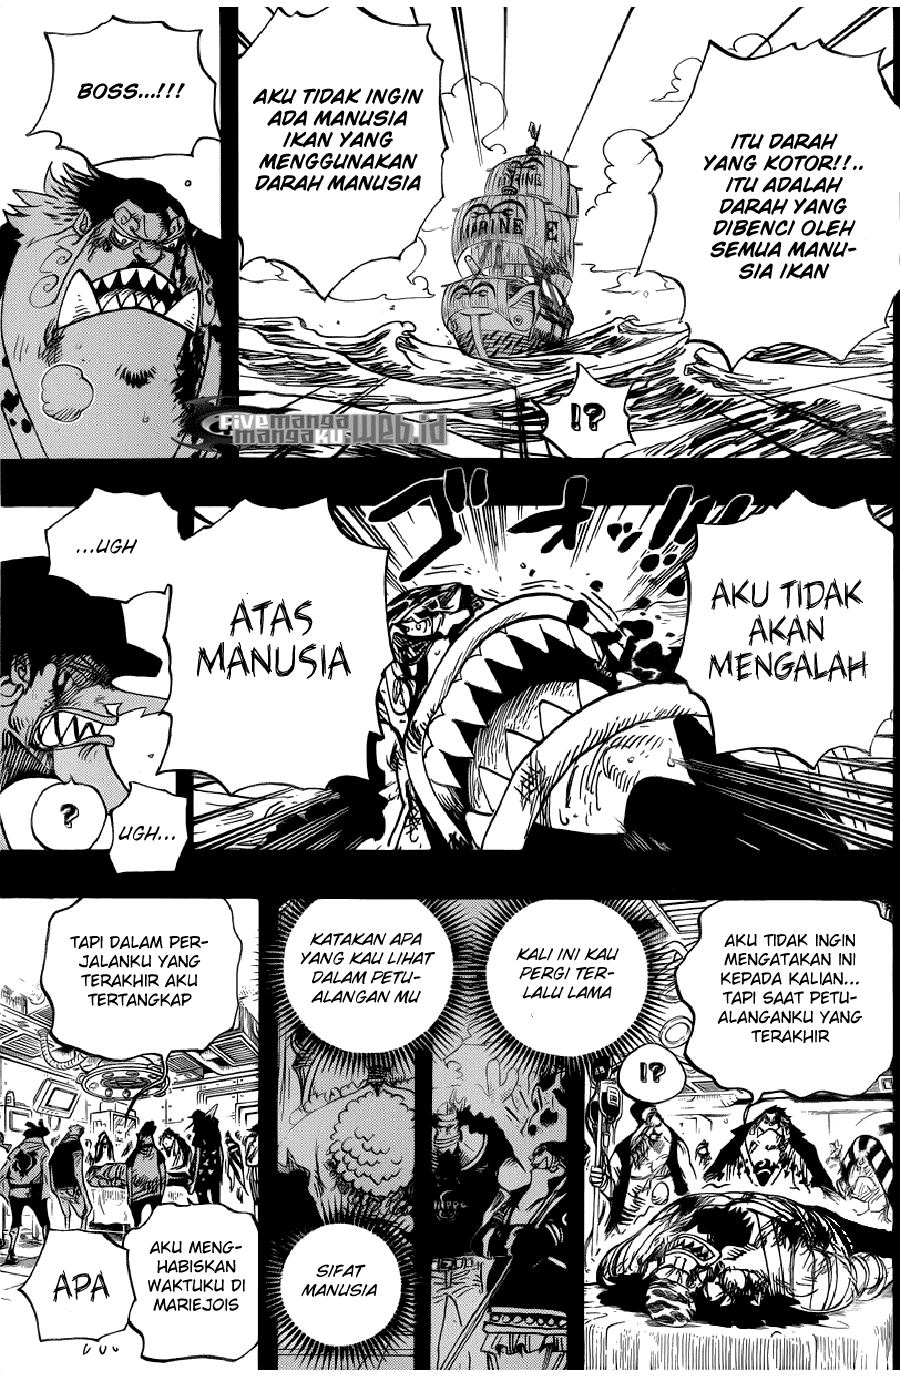 One Piece Chapter 623 – si bajak laut fisher tiger Image 14